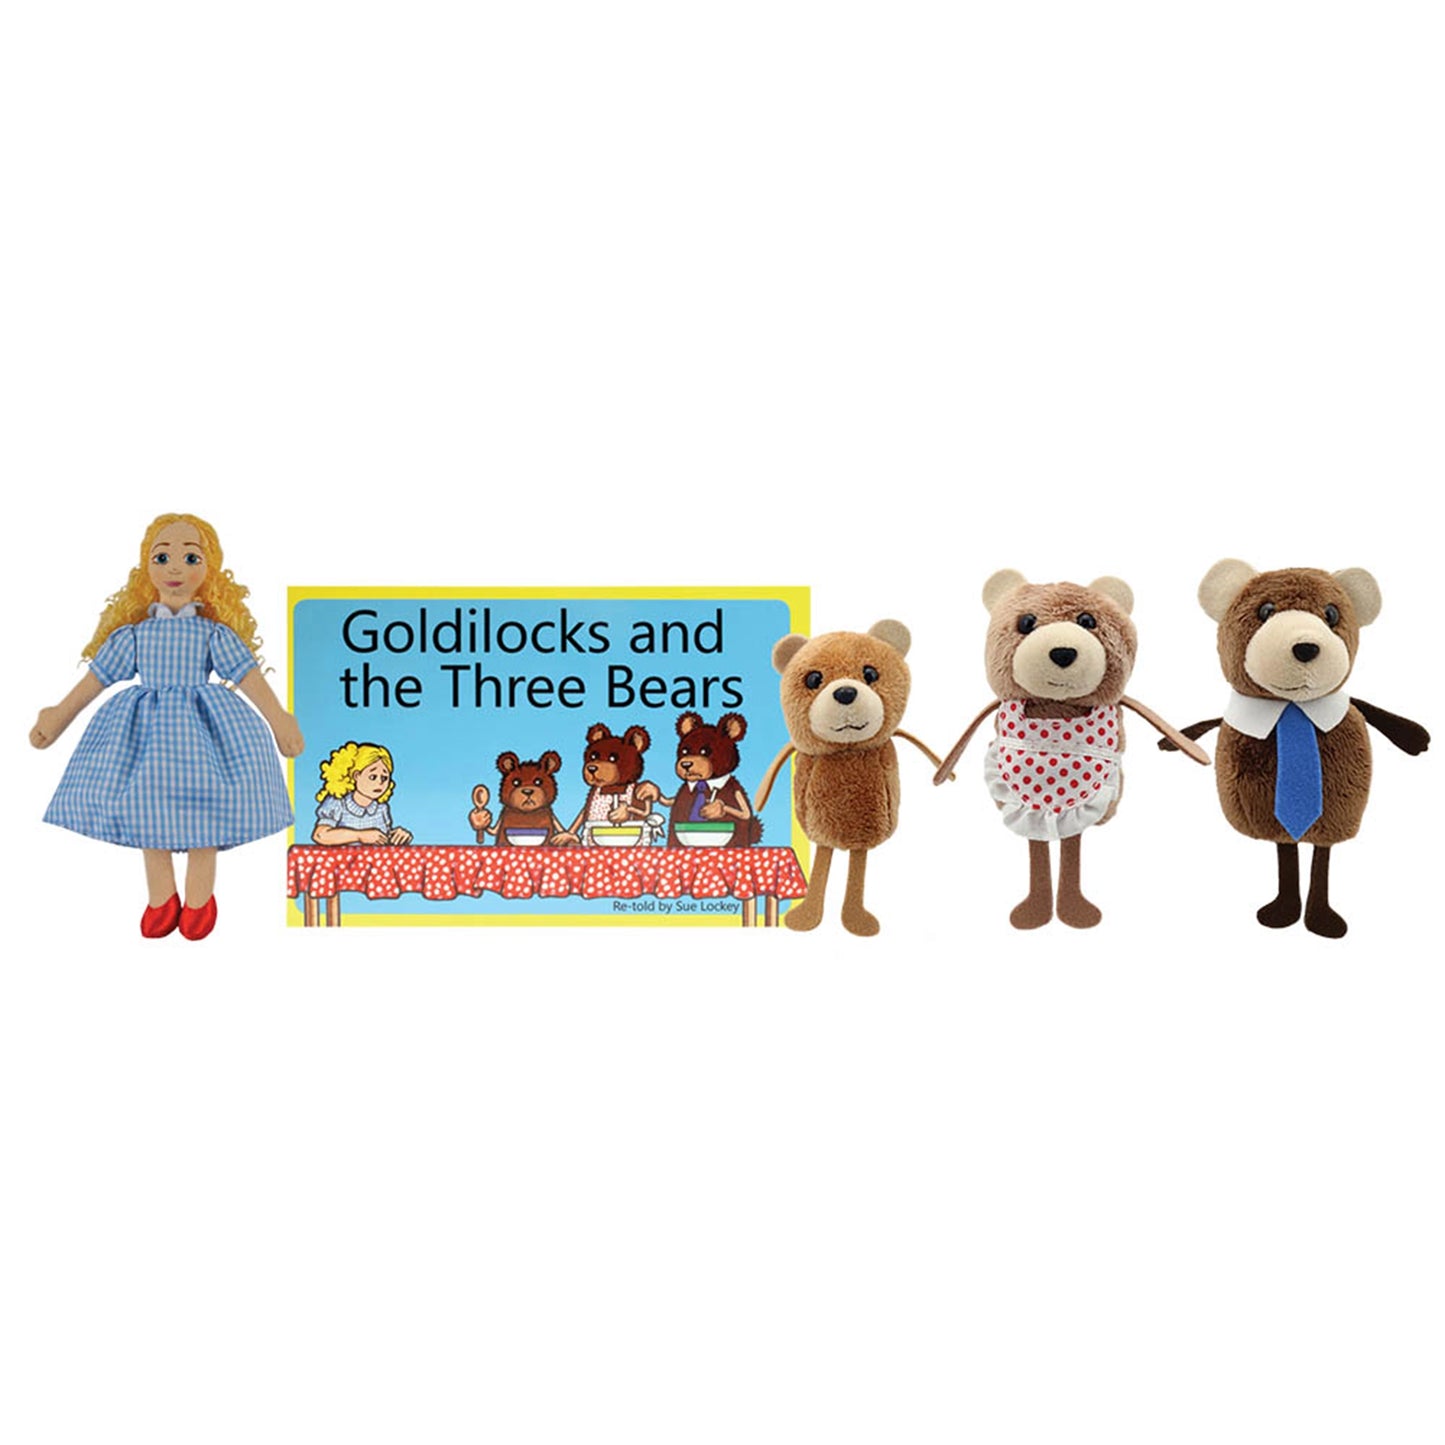 Traditional Story Sets - Goldilocks and the Three Bears - The Puppet Company - The Forgotten Toy Shop